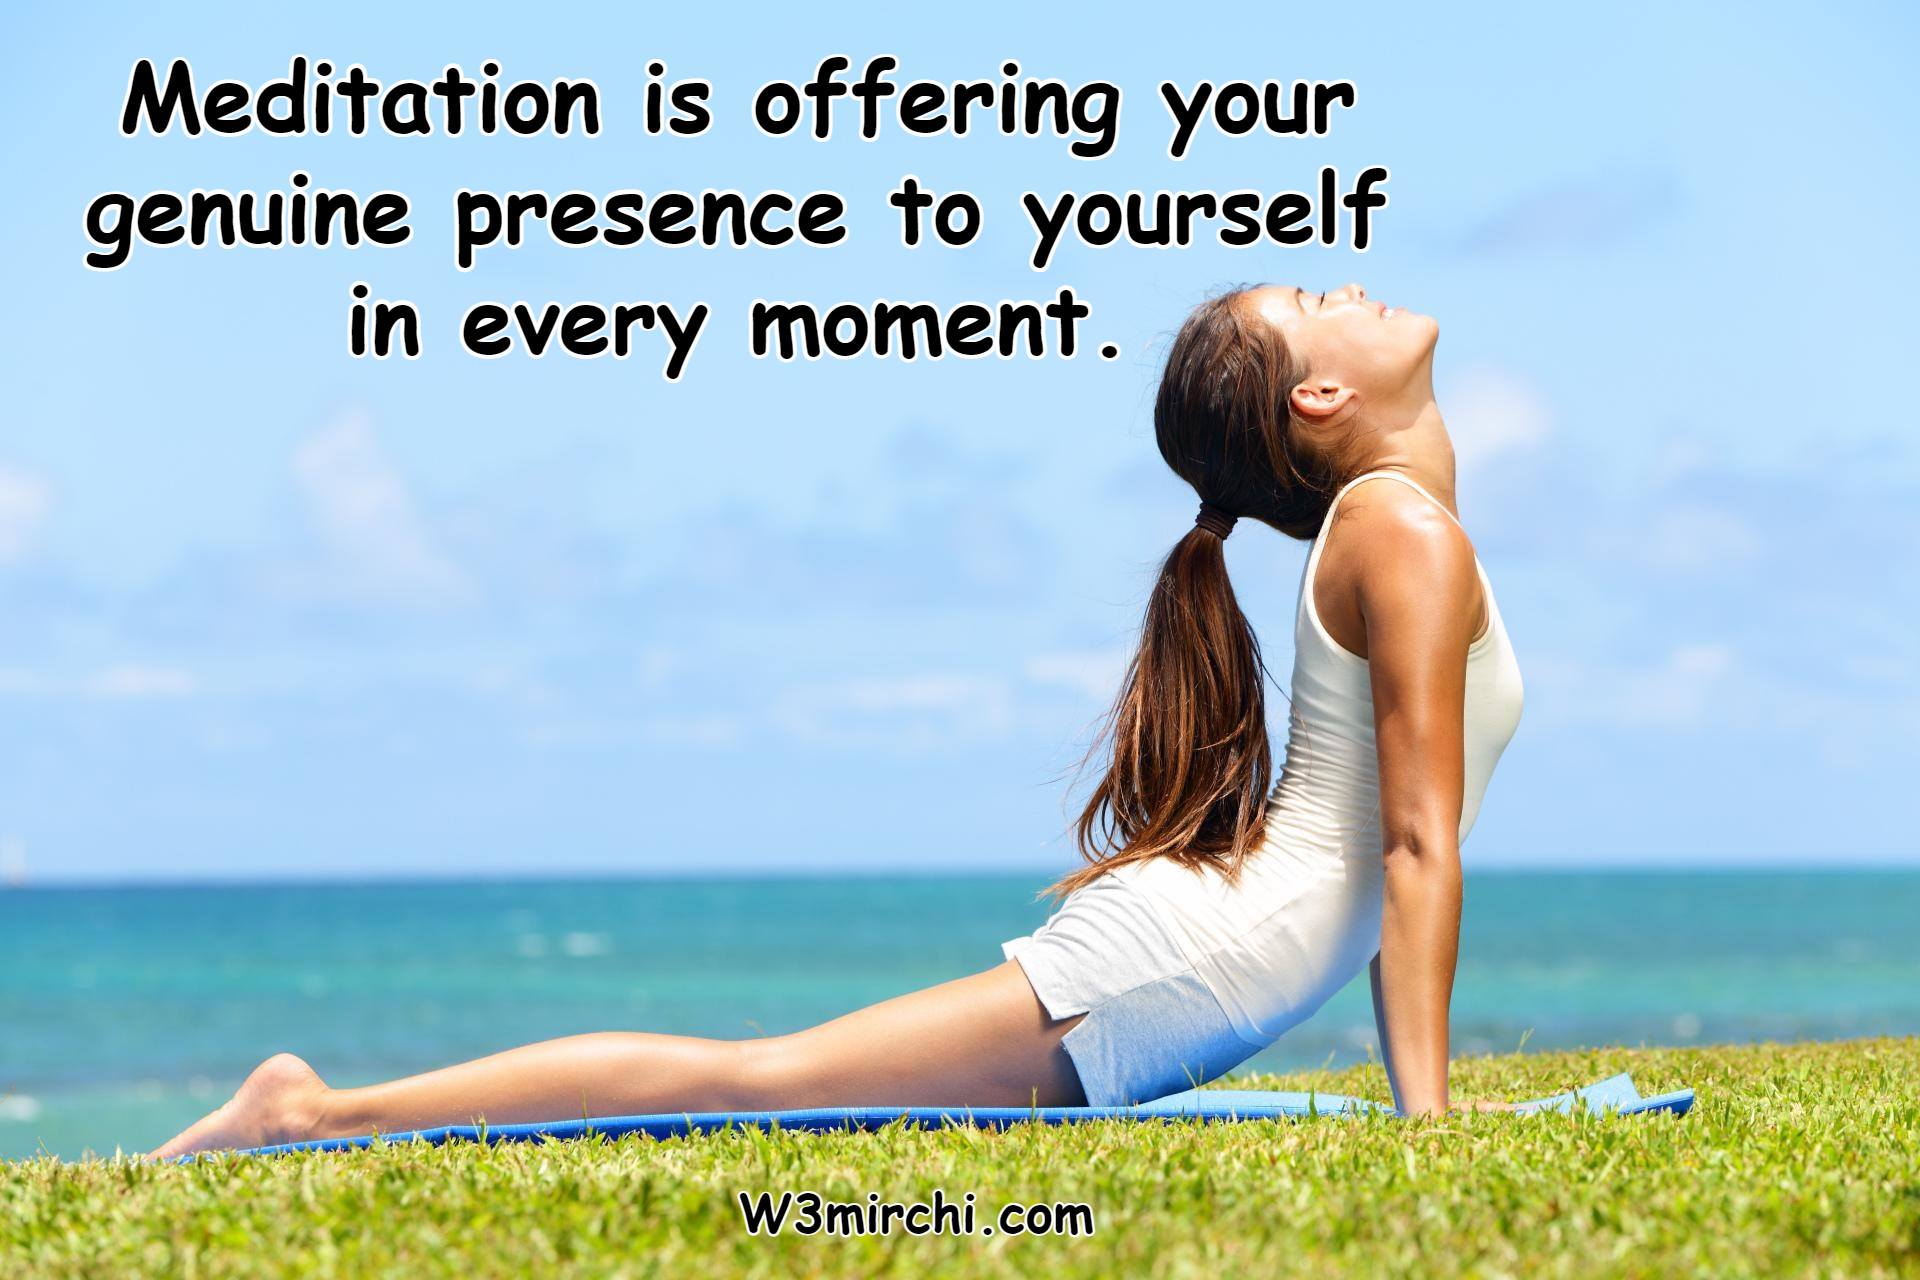 Meditation is offering your genuine